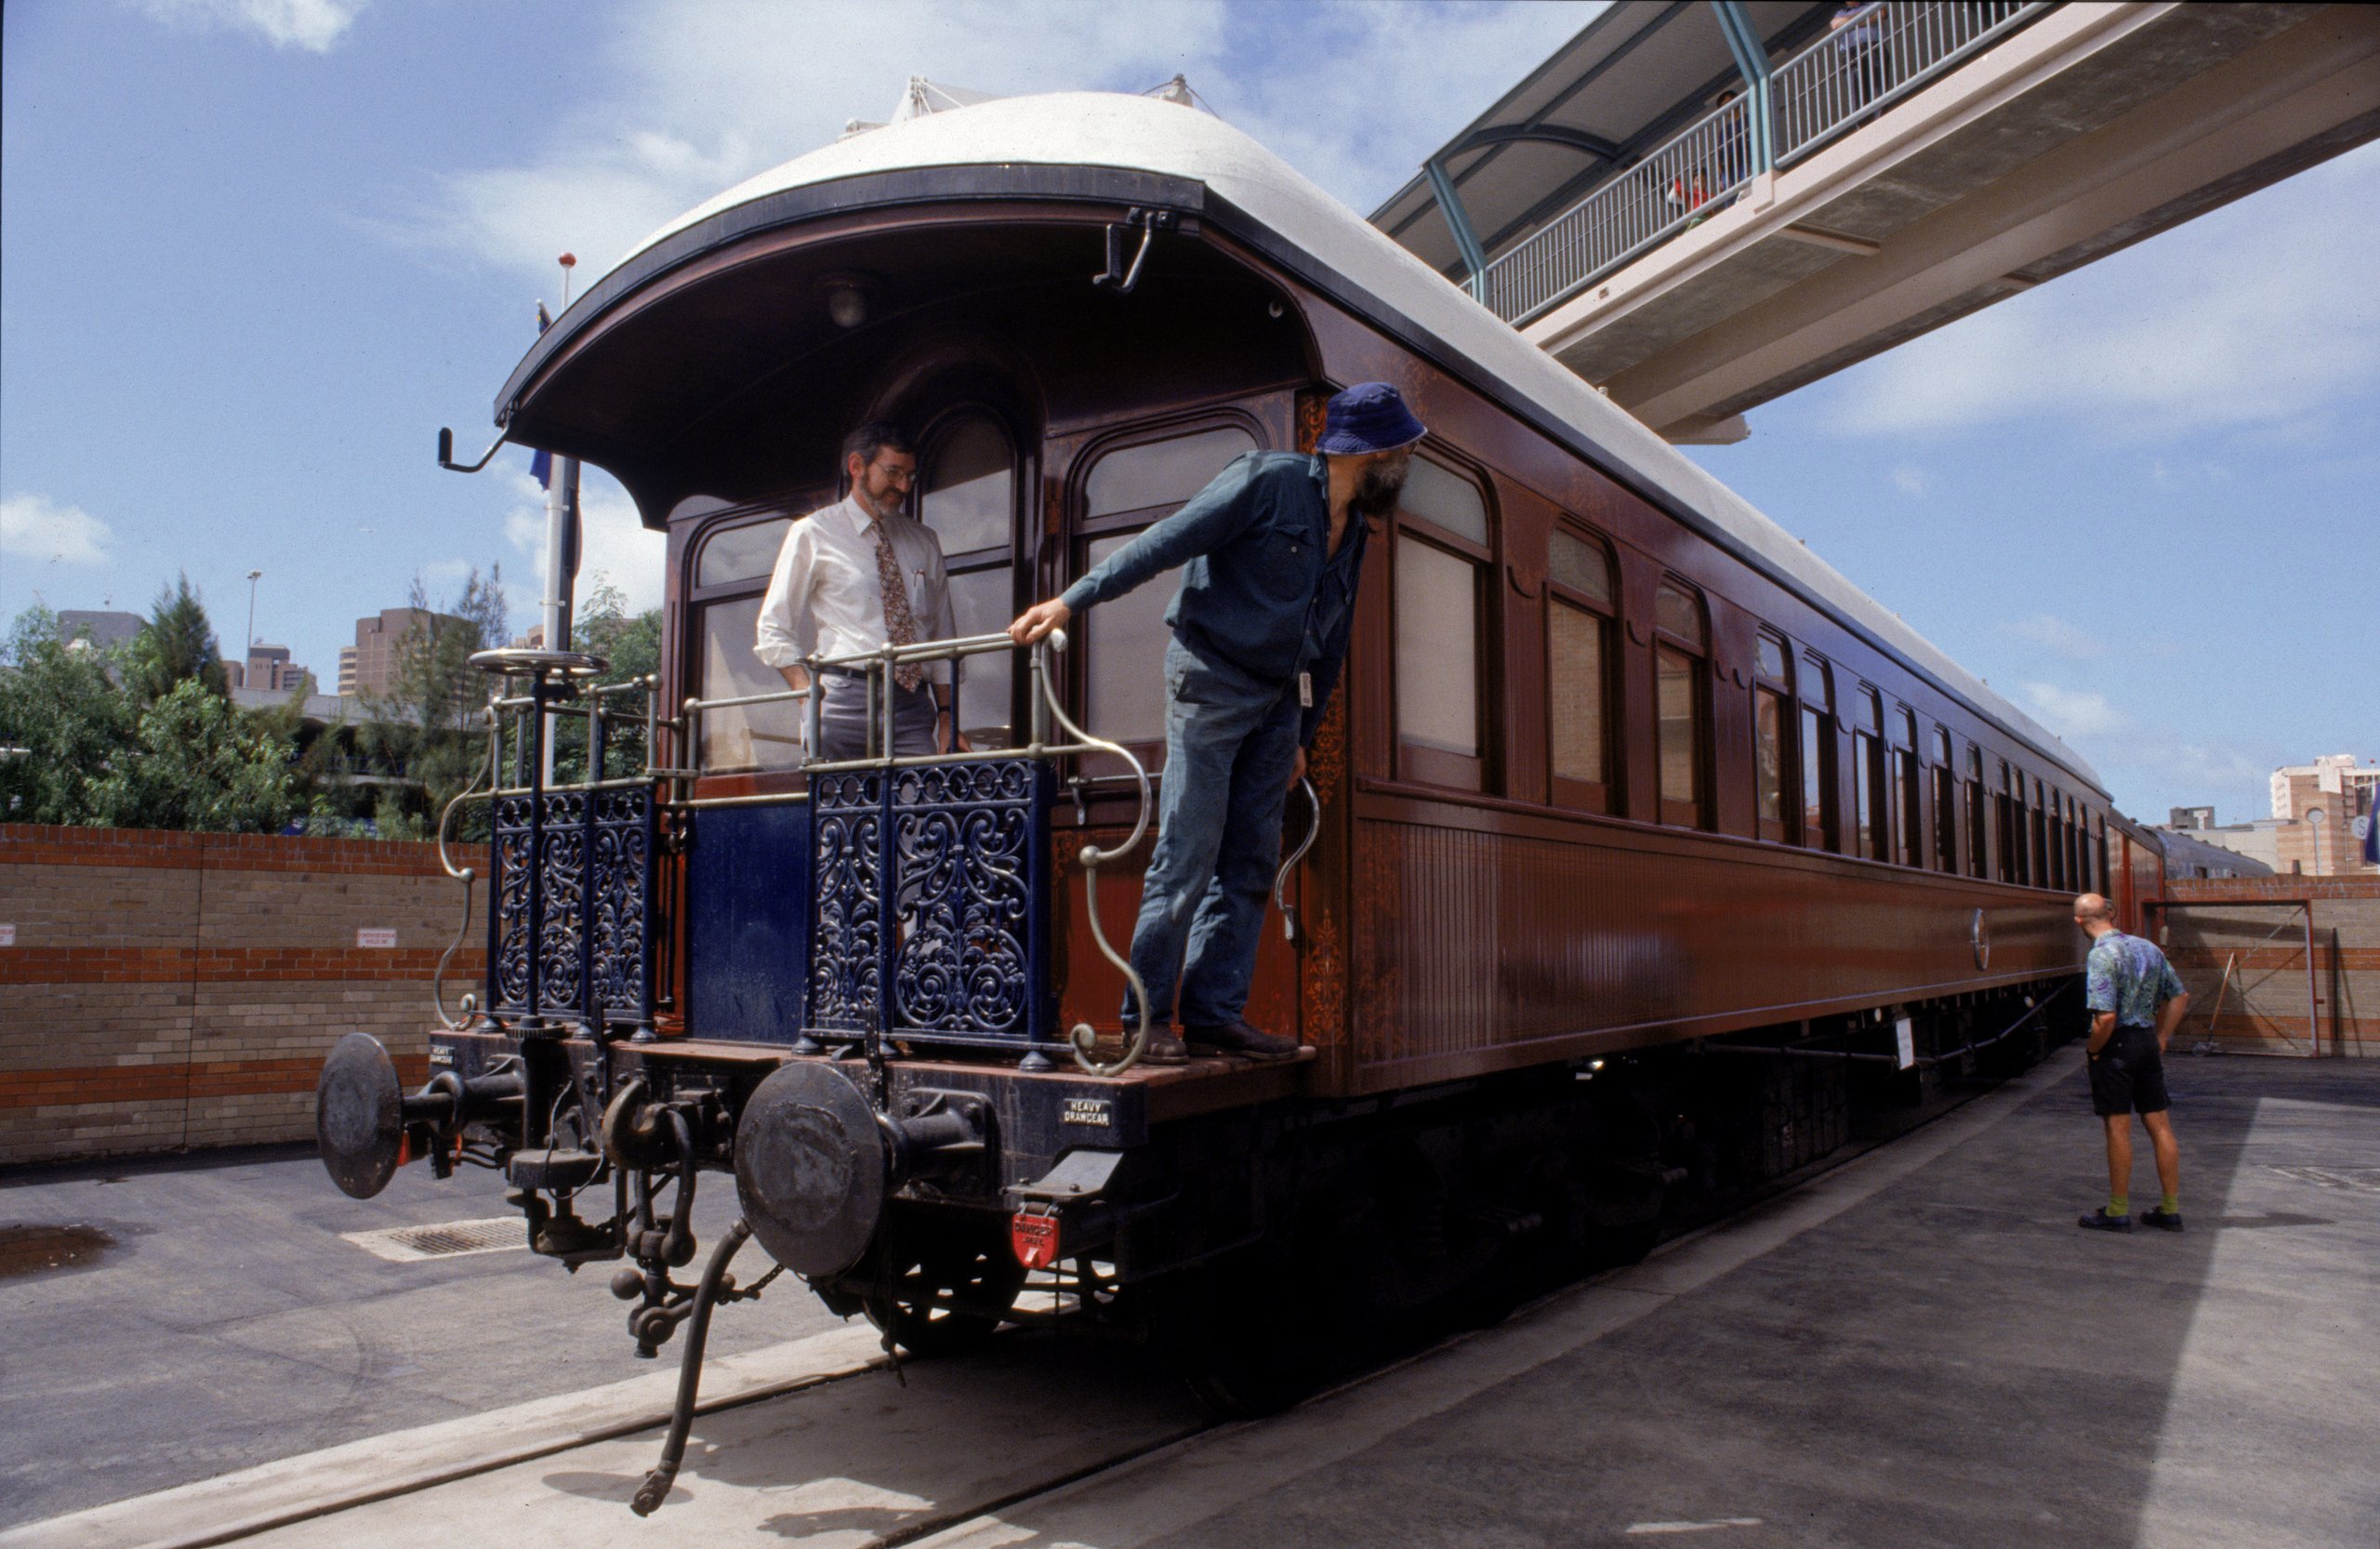 Governor-General's Railway Carriage